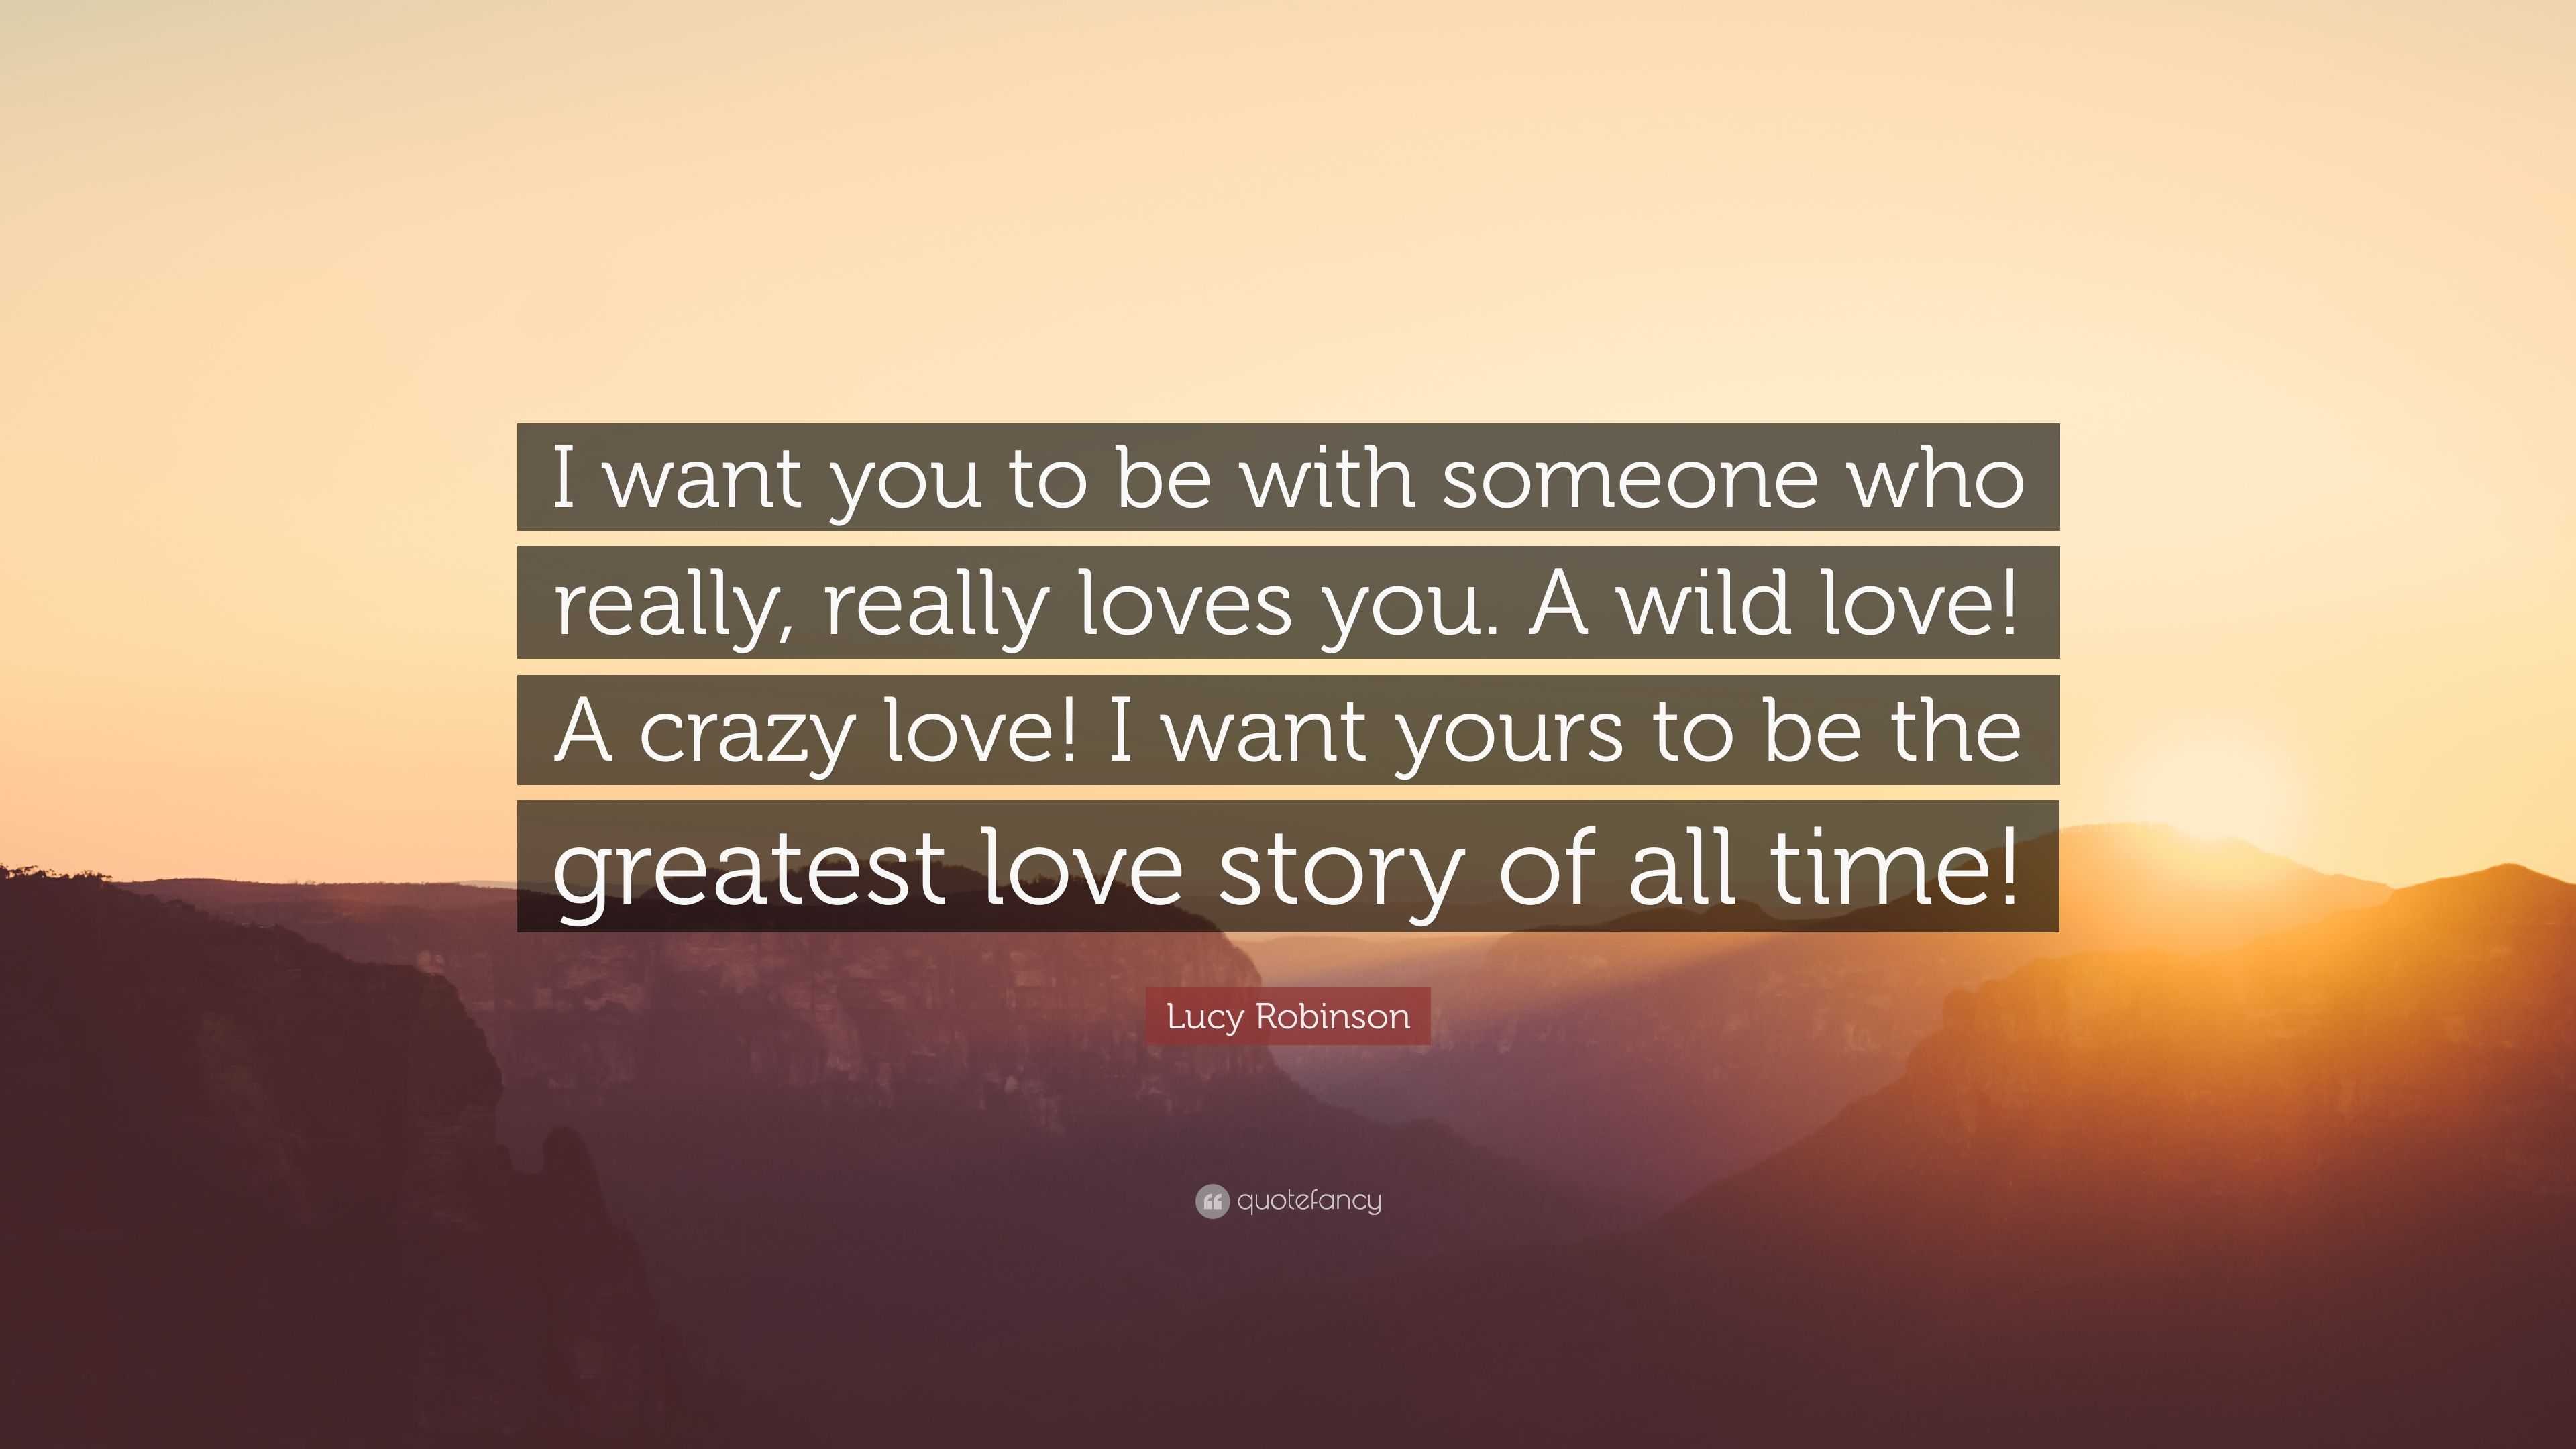 Lucy Robinson Quote “I want you to be with someone who really really